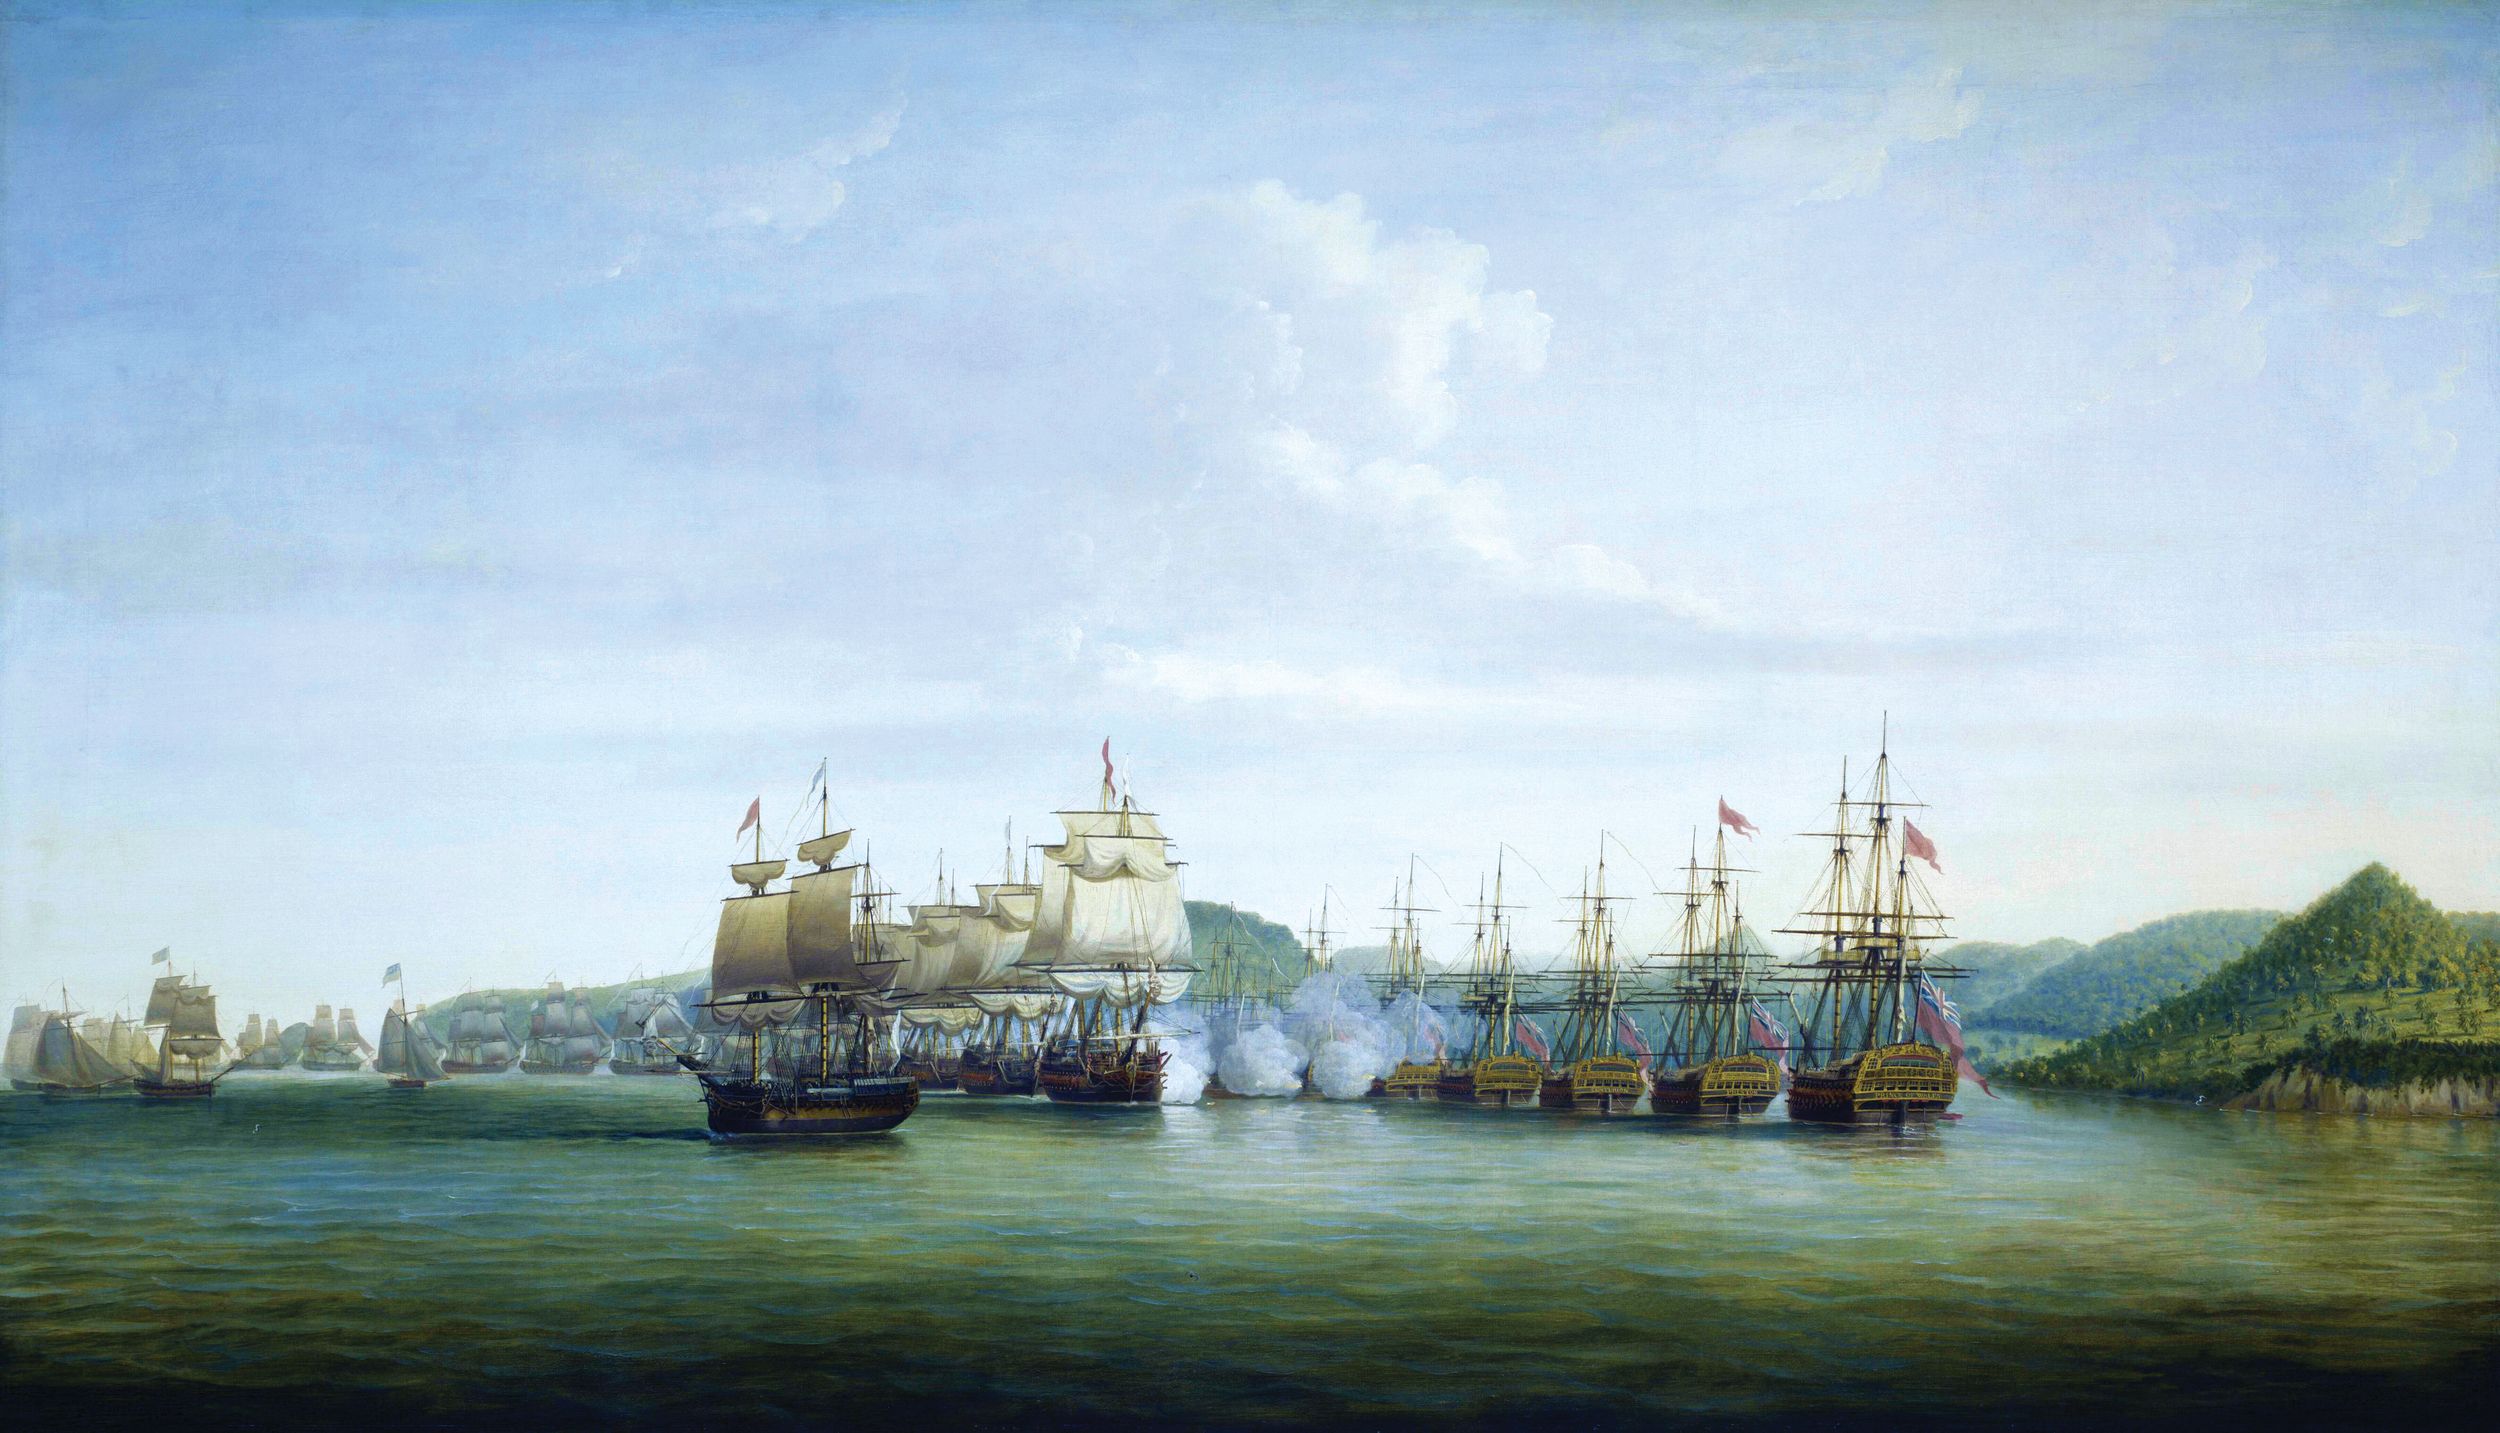 Vice Admiral Count D'Estaing arrived in the northeastern Caribbean in December 1778 too late to prevent the British capture of the French colony of St. Lucia.